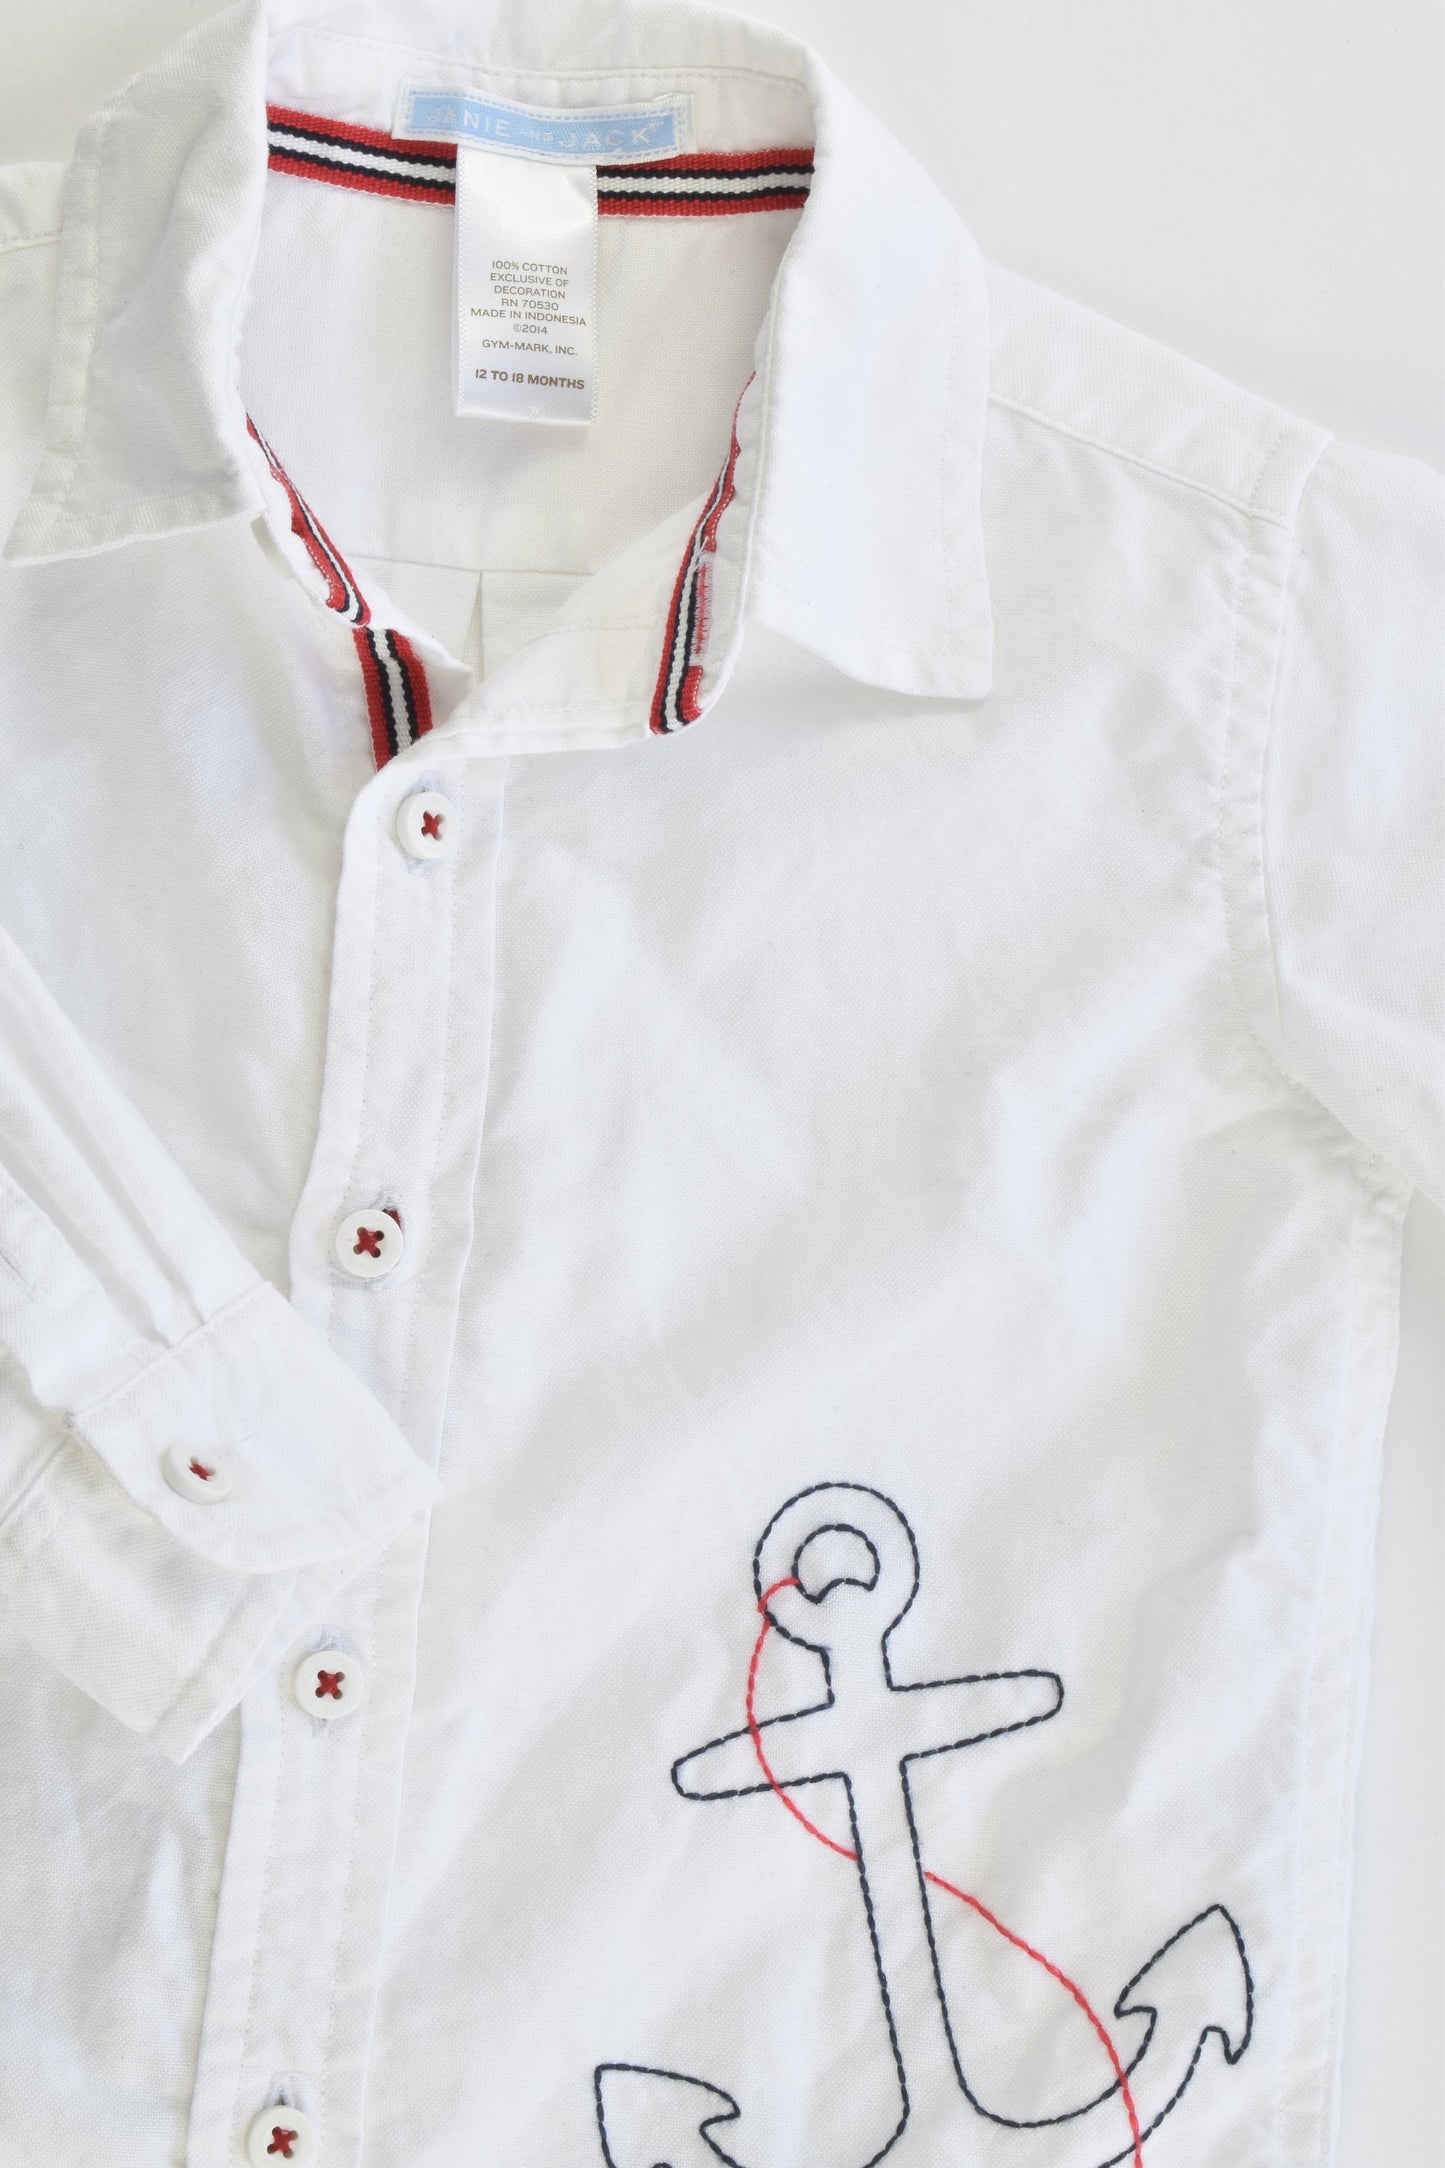 Janie and Jack Size 1 (12-18 months) Nautical Button-Up Shirt